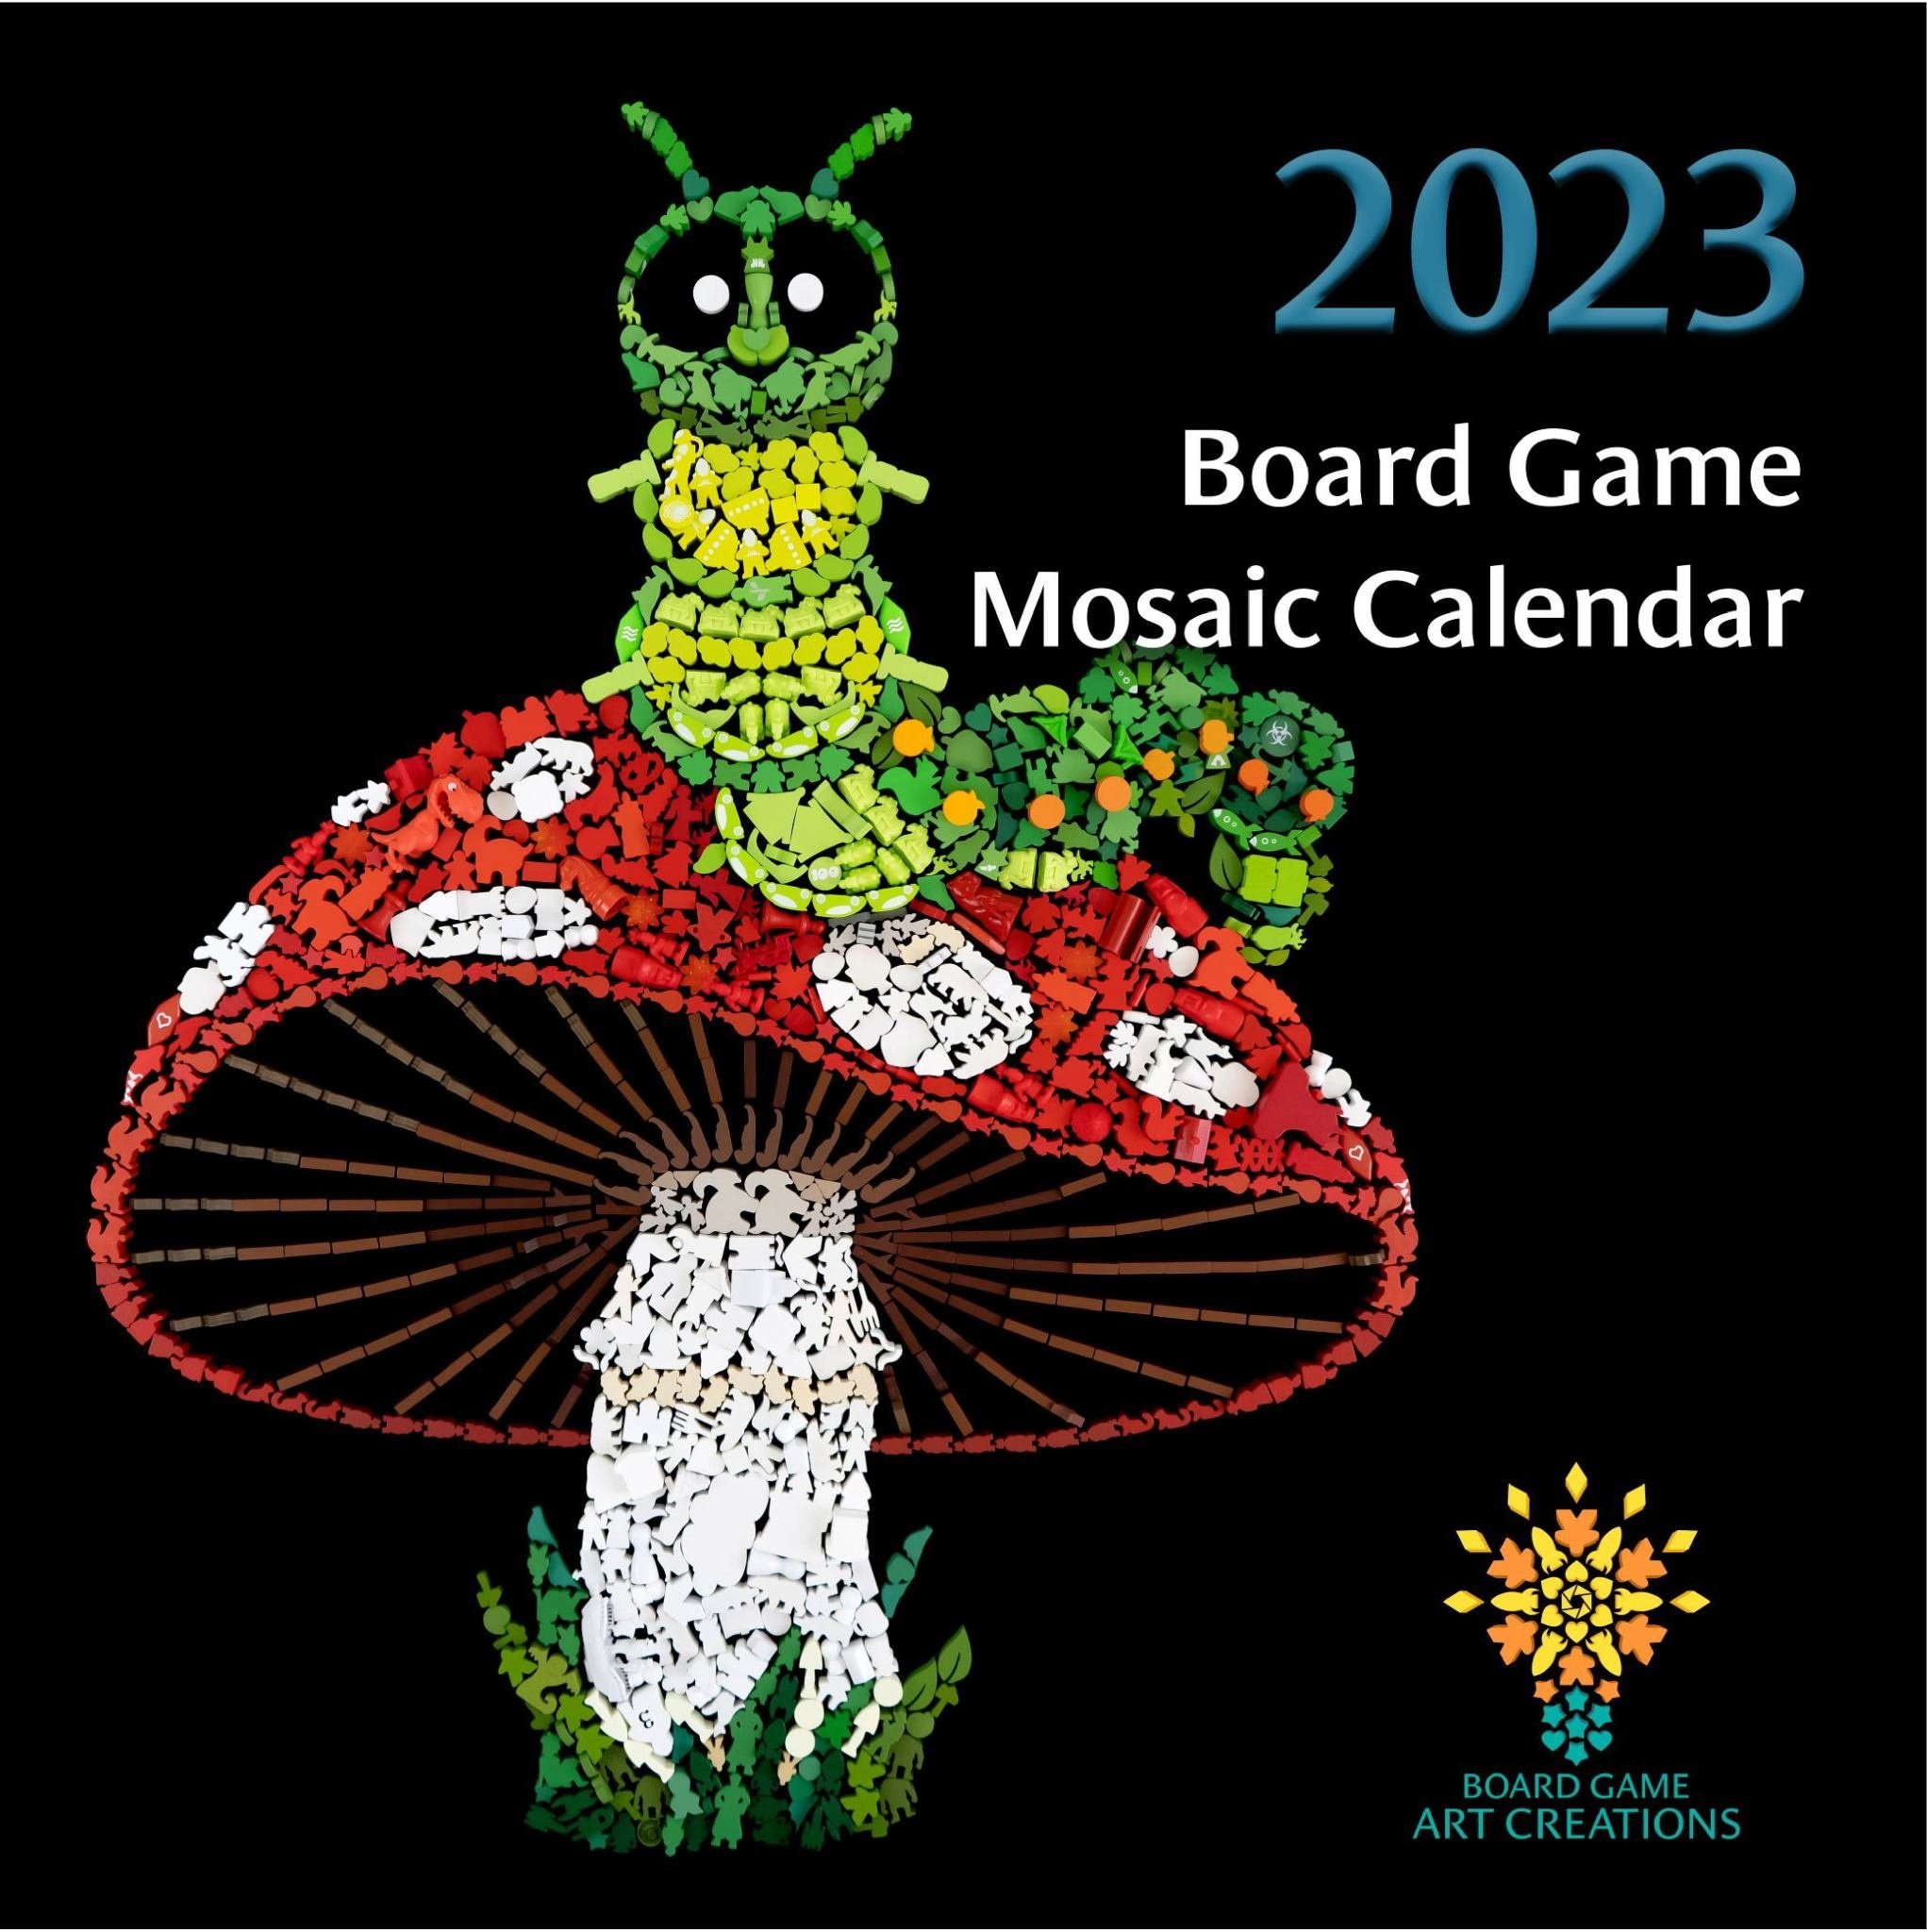 Board Game Mosaic Calendar 2023 The Guilded Grayland